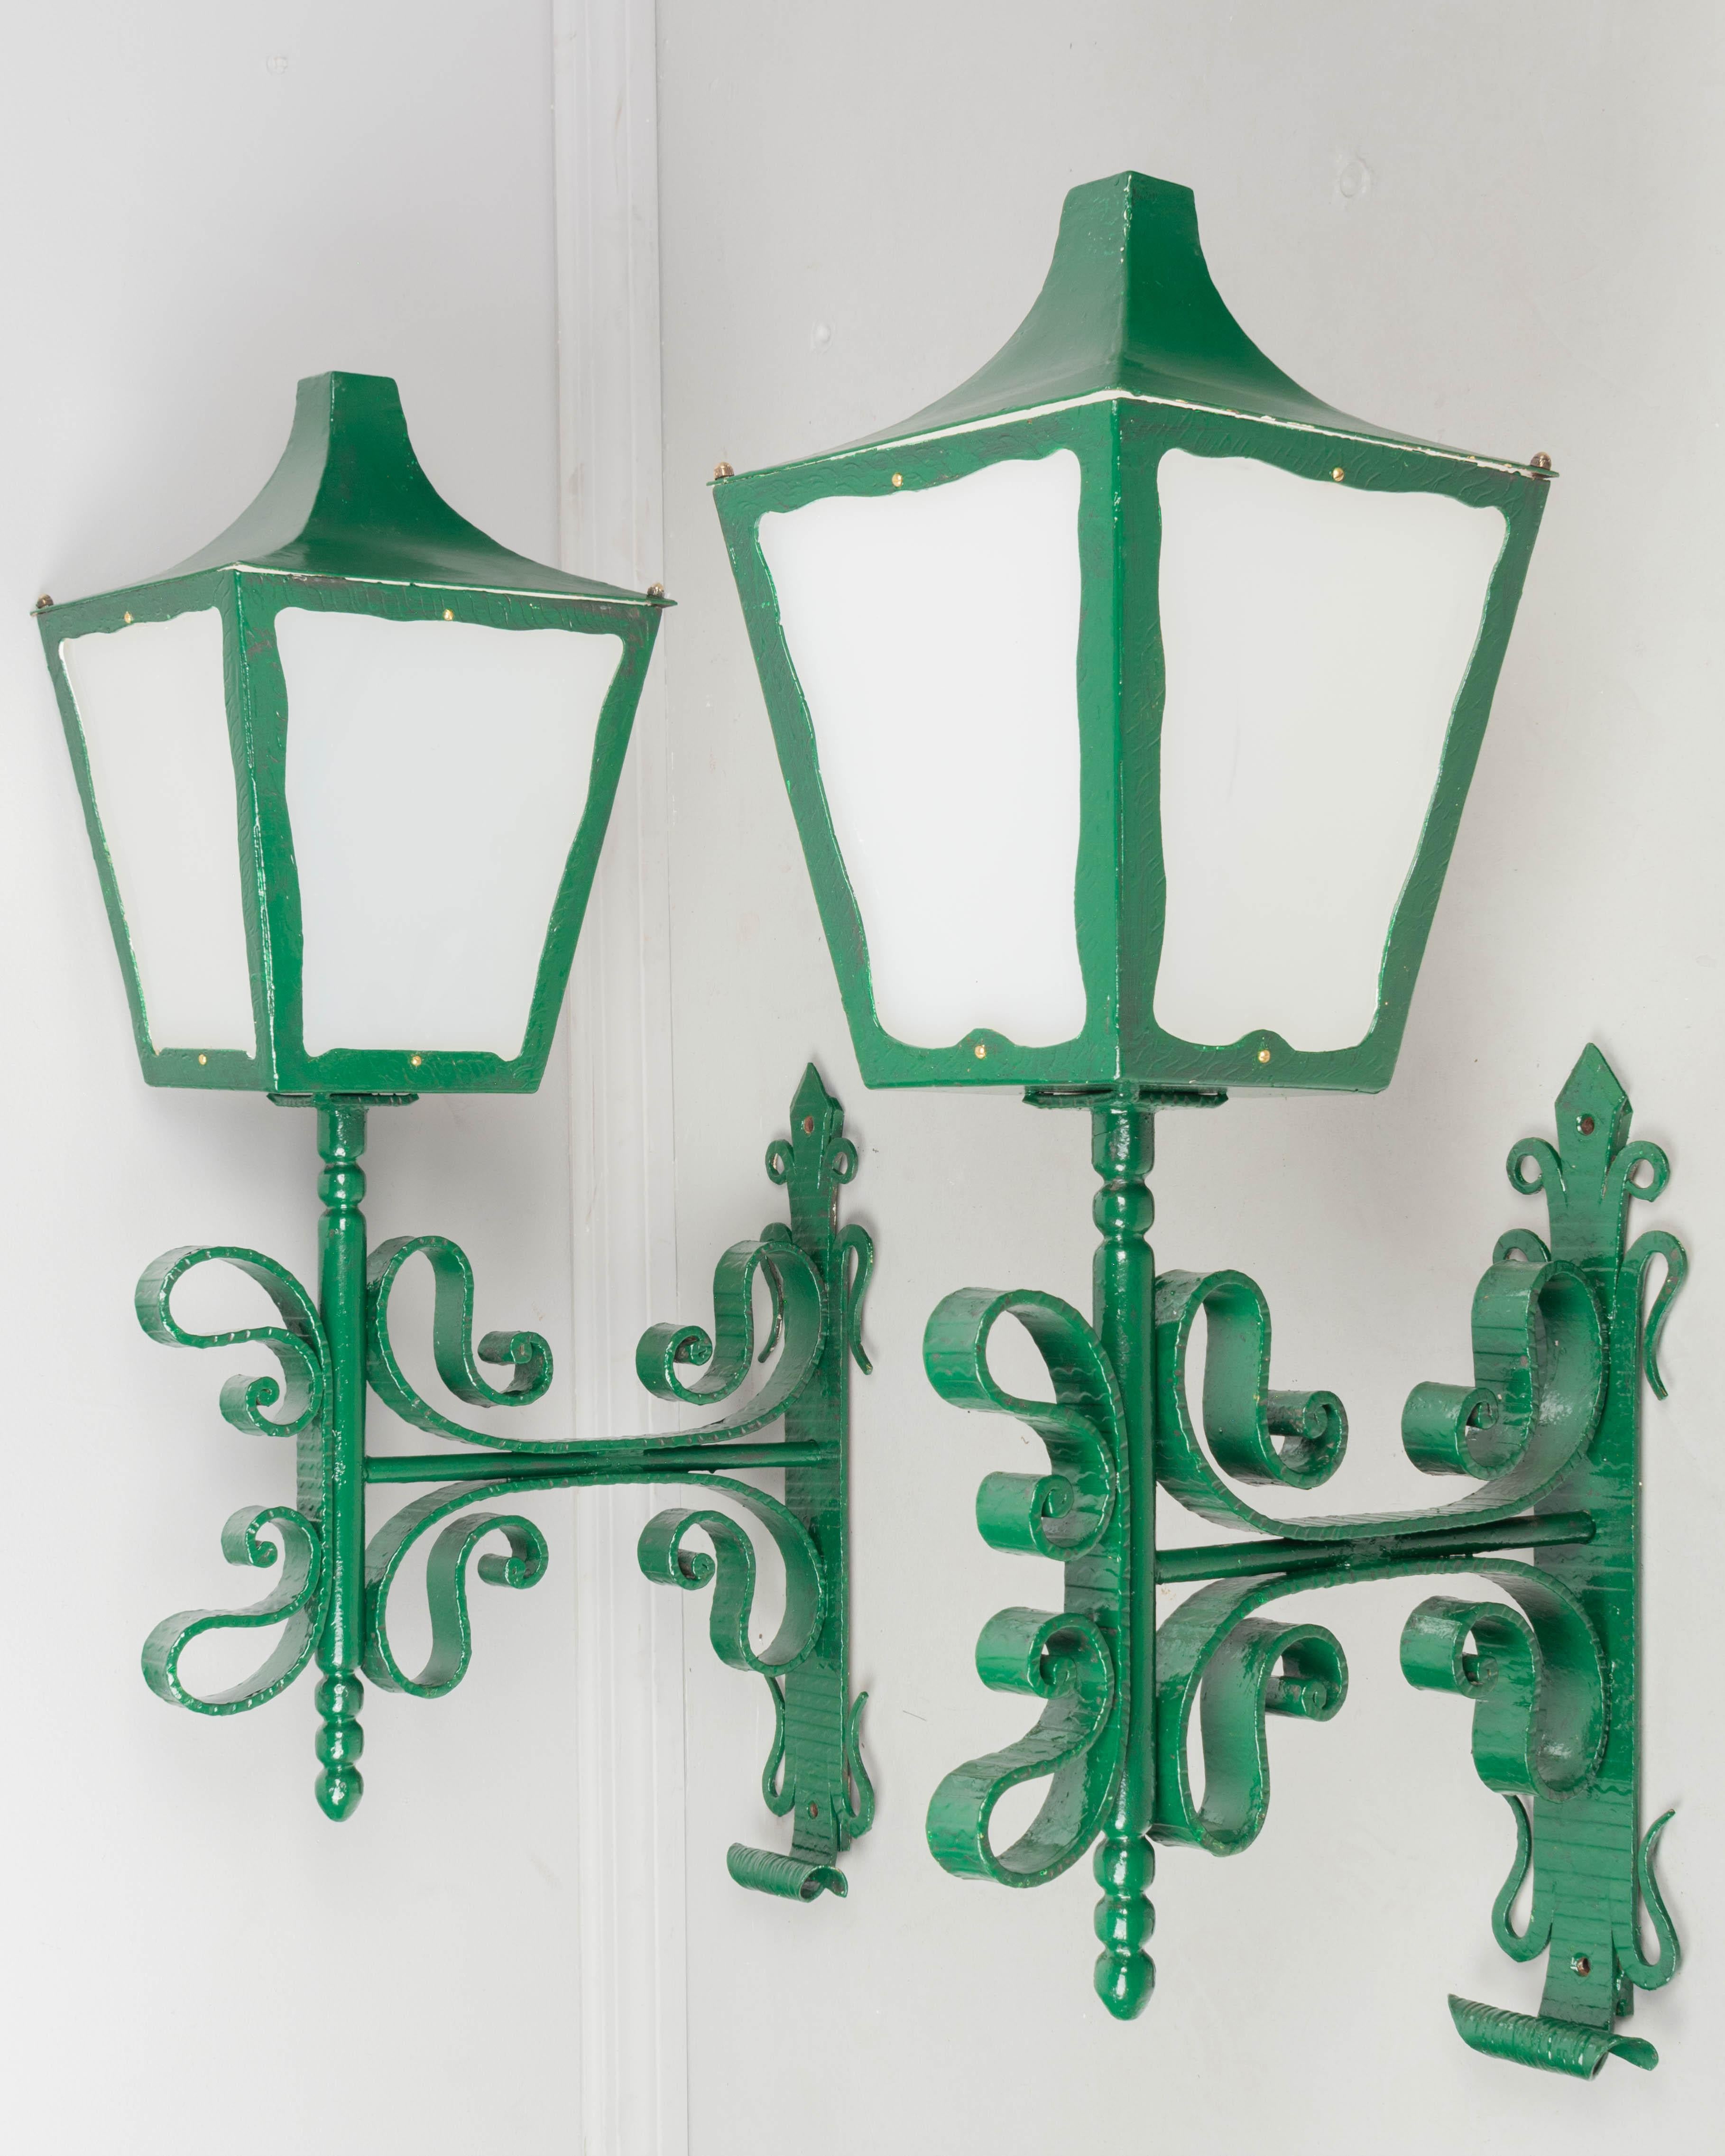 Pair of Large French Architectural Wall Lanterns In Good Condition For Sale In Winter Park, FL